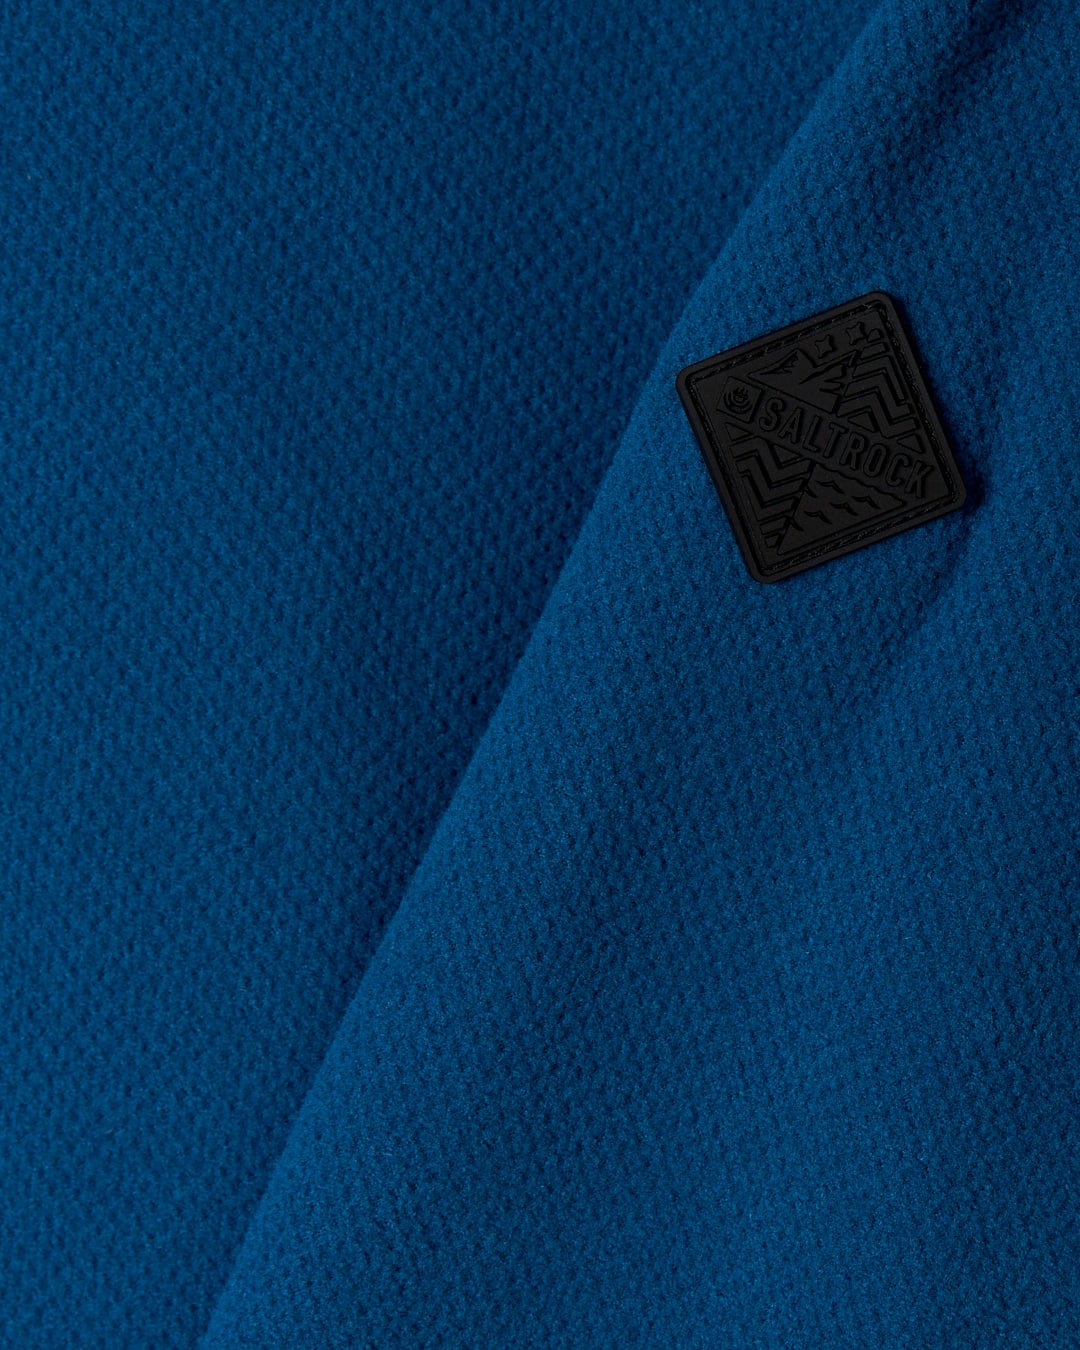 A close up of a Saltrock Theo - Mens 1/4 Neck Fleece - Blue made of polyester fabric with a black patch on it.